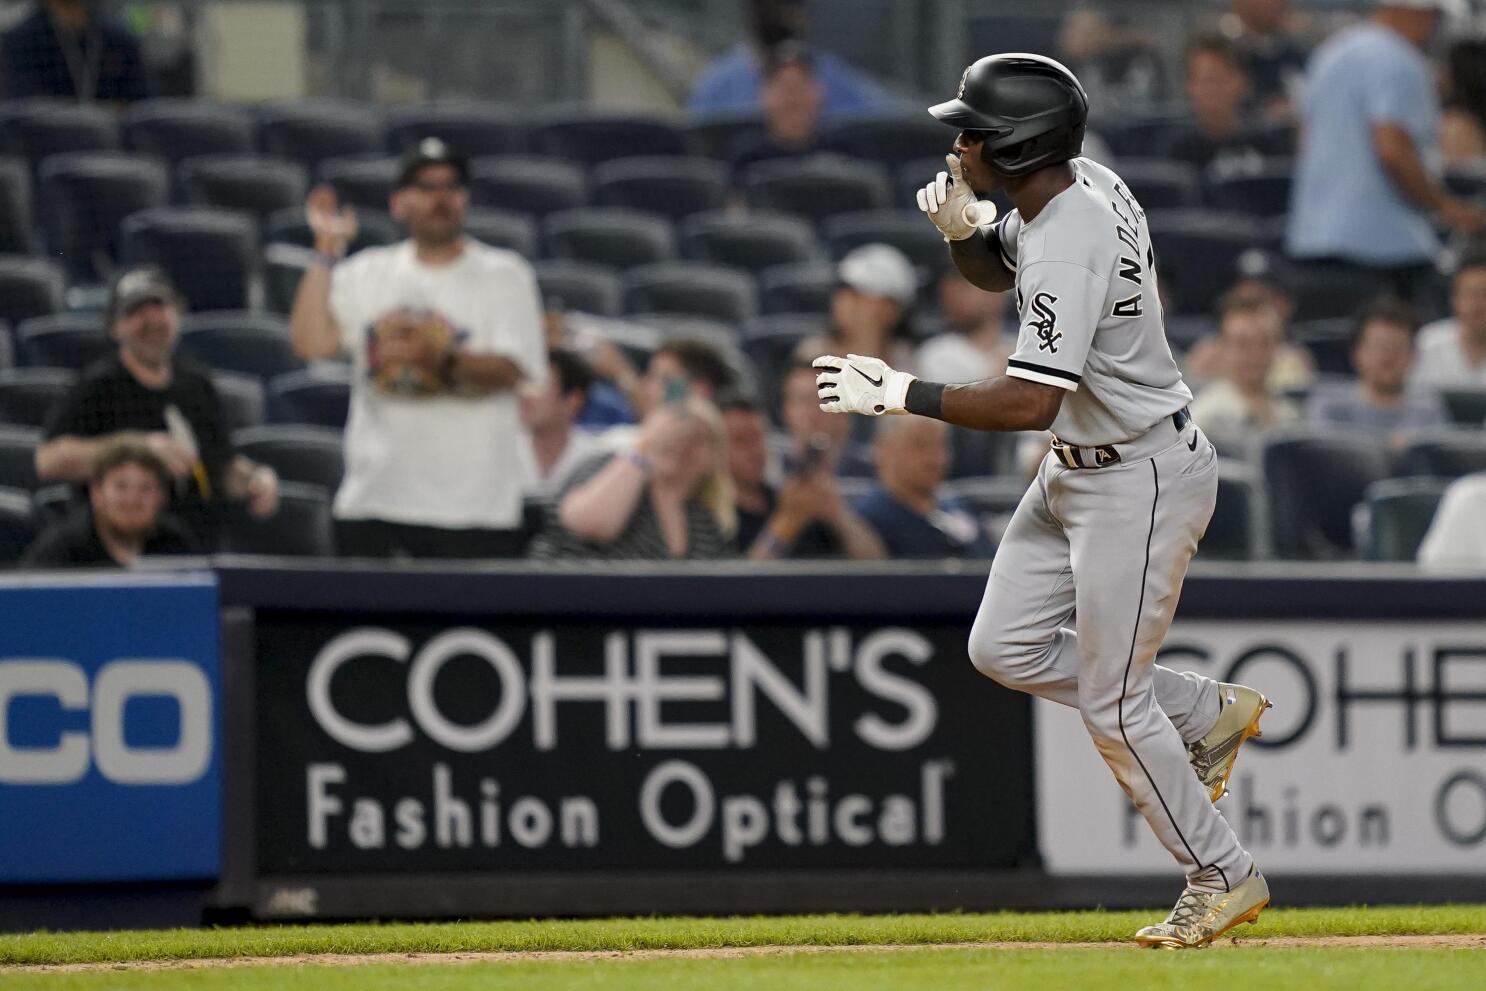 Anderson's HR hushes Yankees, lifts Chisox to twinbill sweep